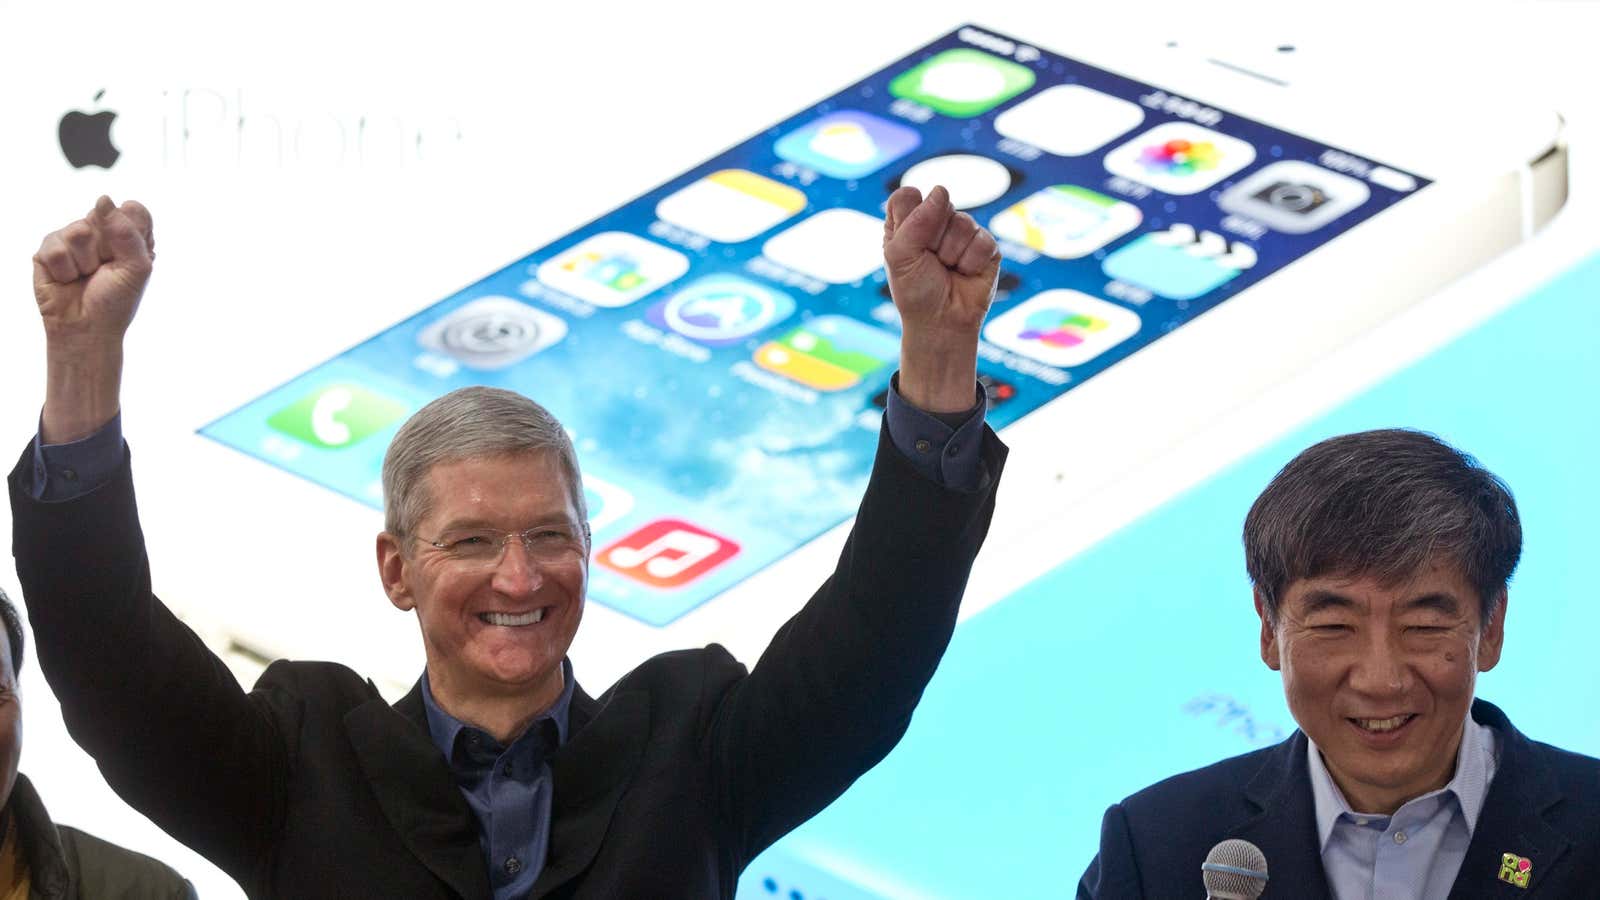 Sales of iPhones in emerging markets are giving Apple CEO Tim Cook reason to celebrate.